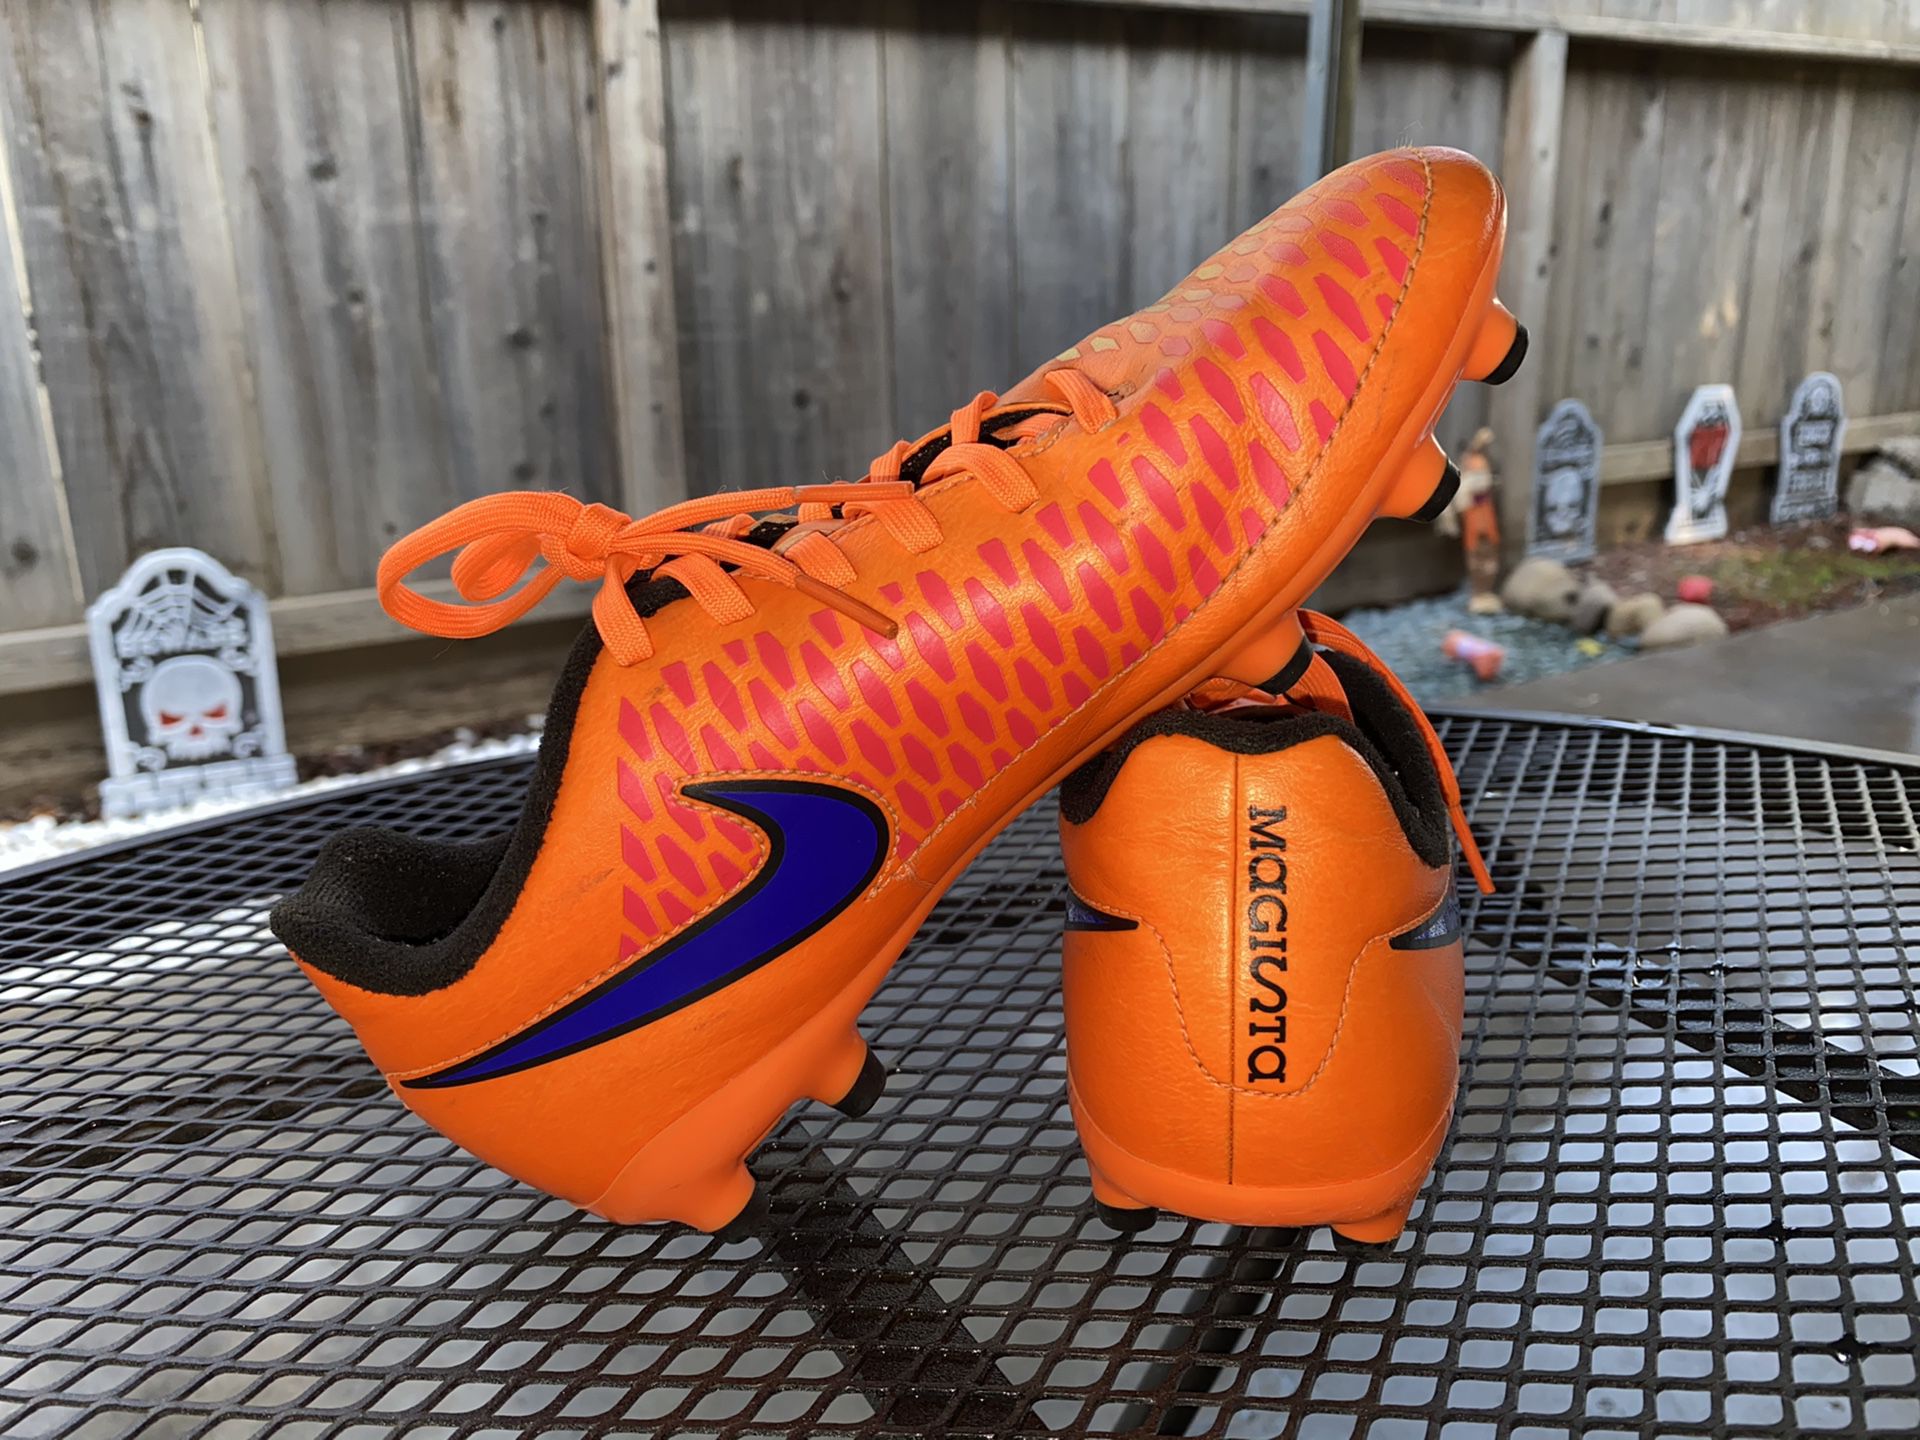 Magista soccer shoes 4Y for in Merced, CA - OfferUp